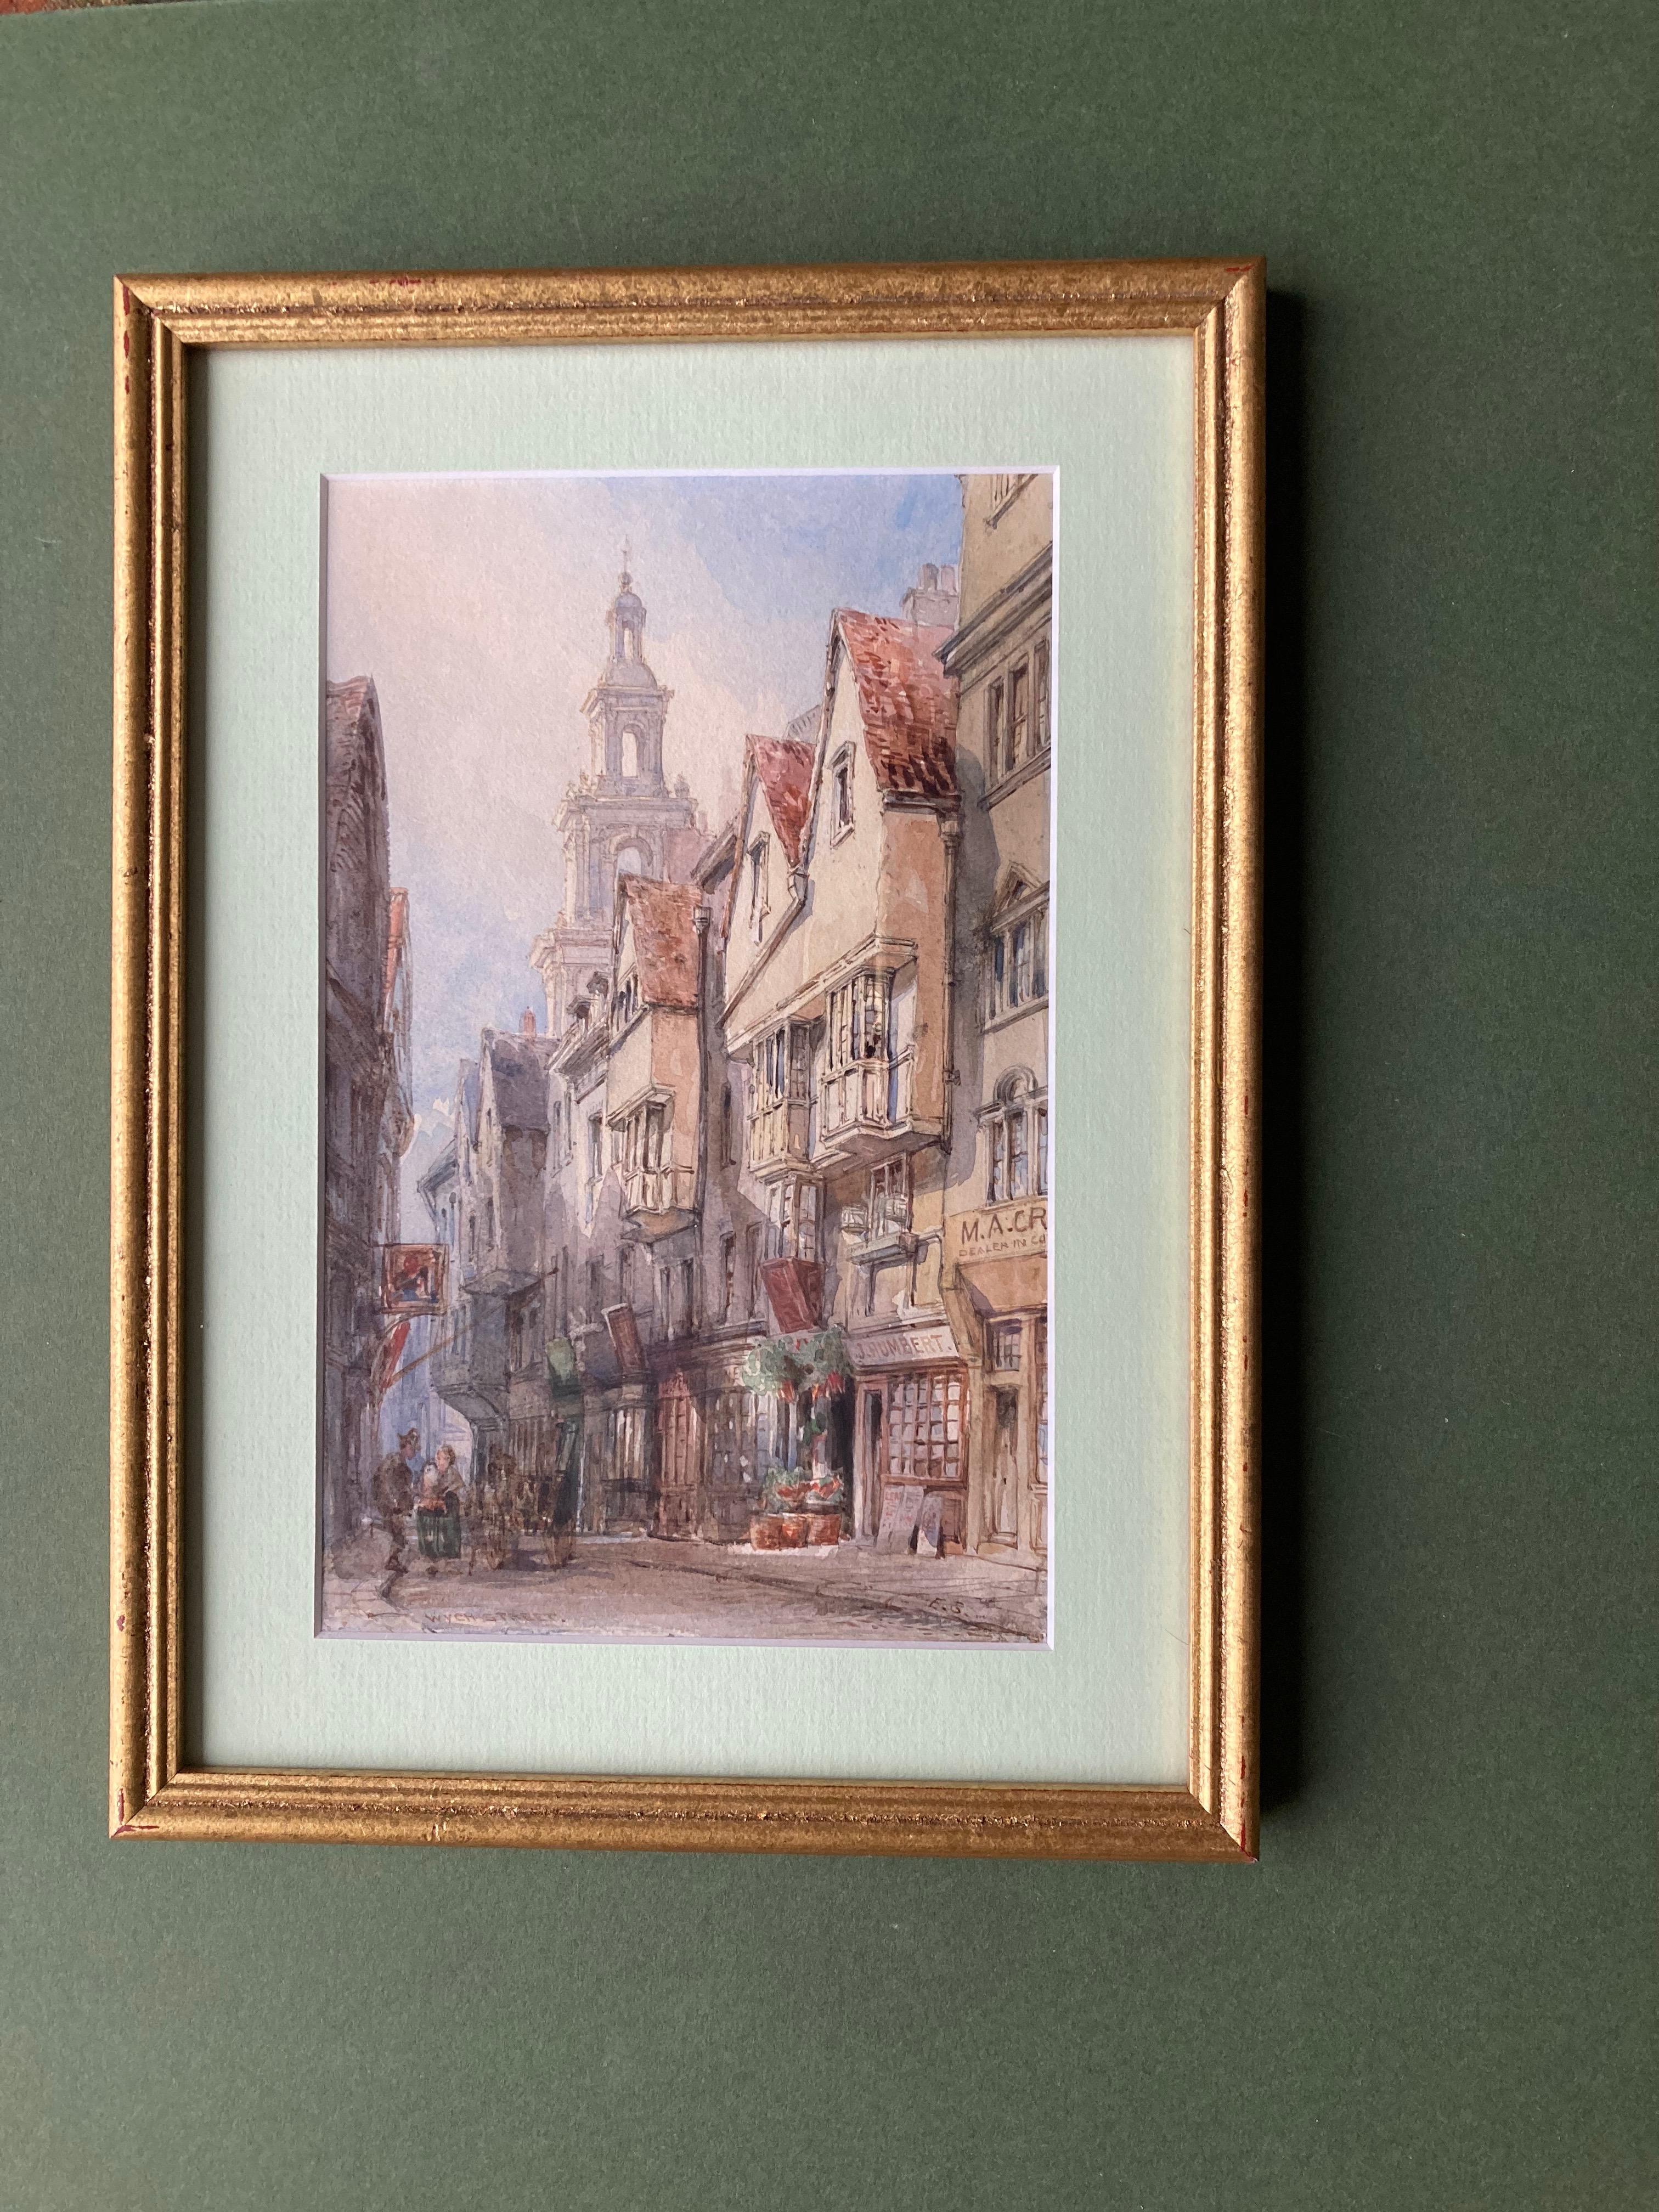 A very atmospheric Victorian London street scene, finely painted with wonderful detailing to the church spire.

Ernest George (1839-1922)
Wych Street
Signed with initials and inscribed with title
Old label verso, including an old